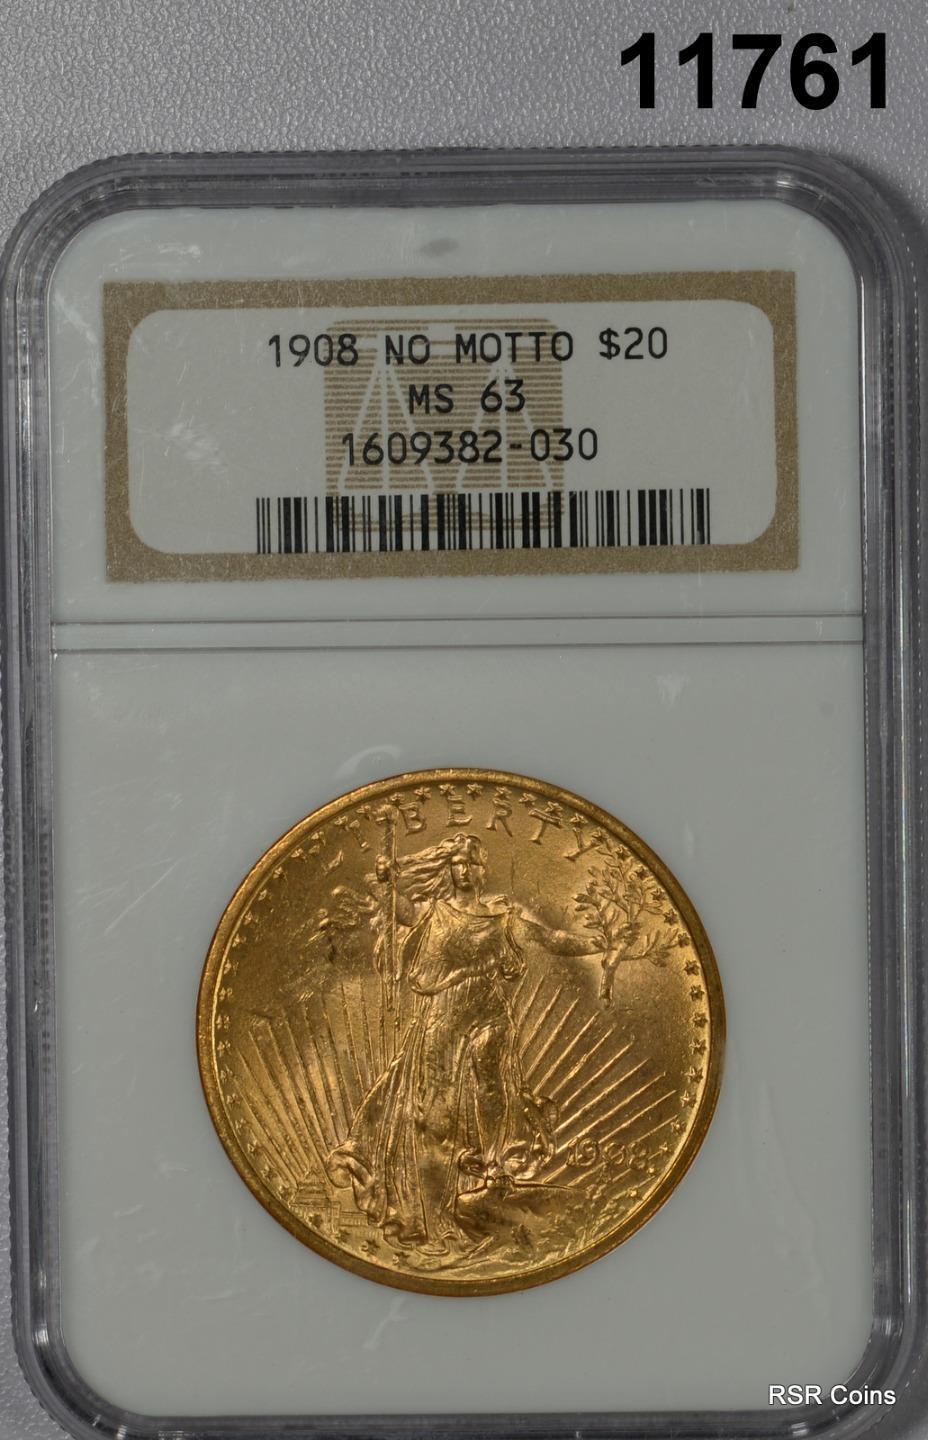 1908 NO MOTTO $20 ST GAUDENS GOLD DOUBLE EAGLE NGC CERTIFIED MS63! #11761